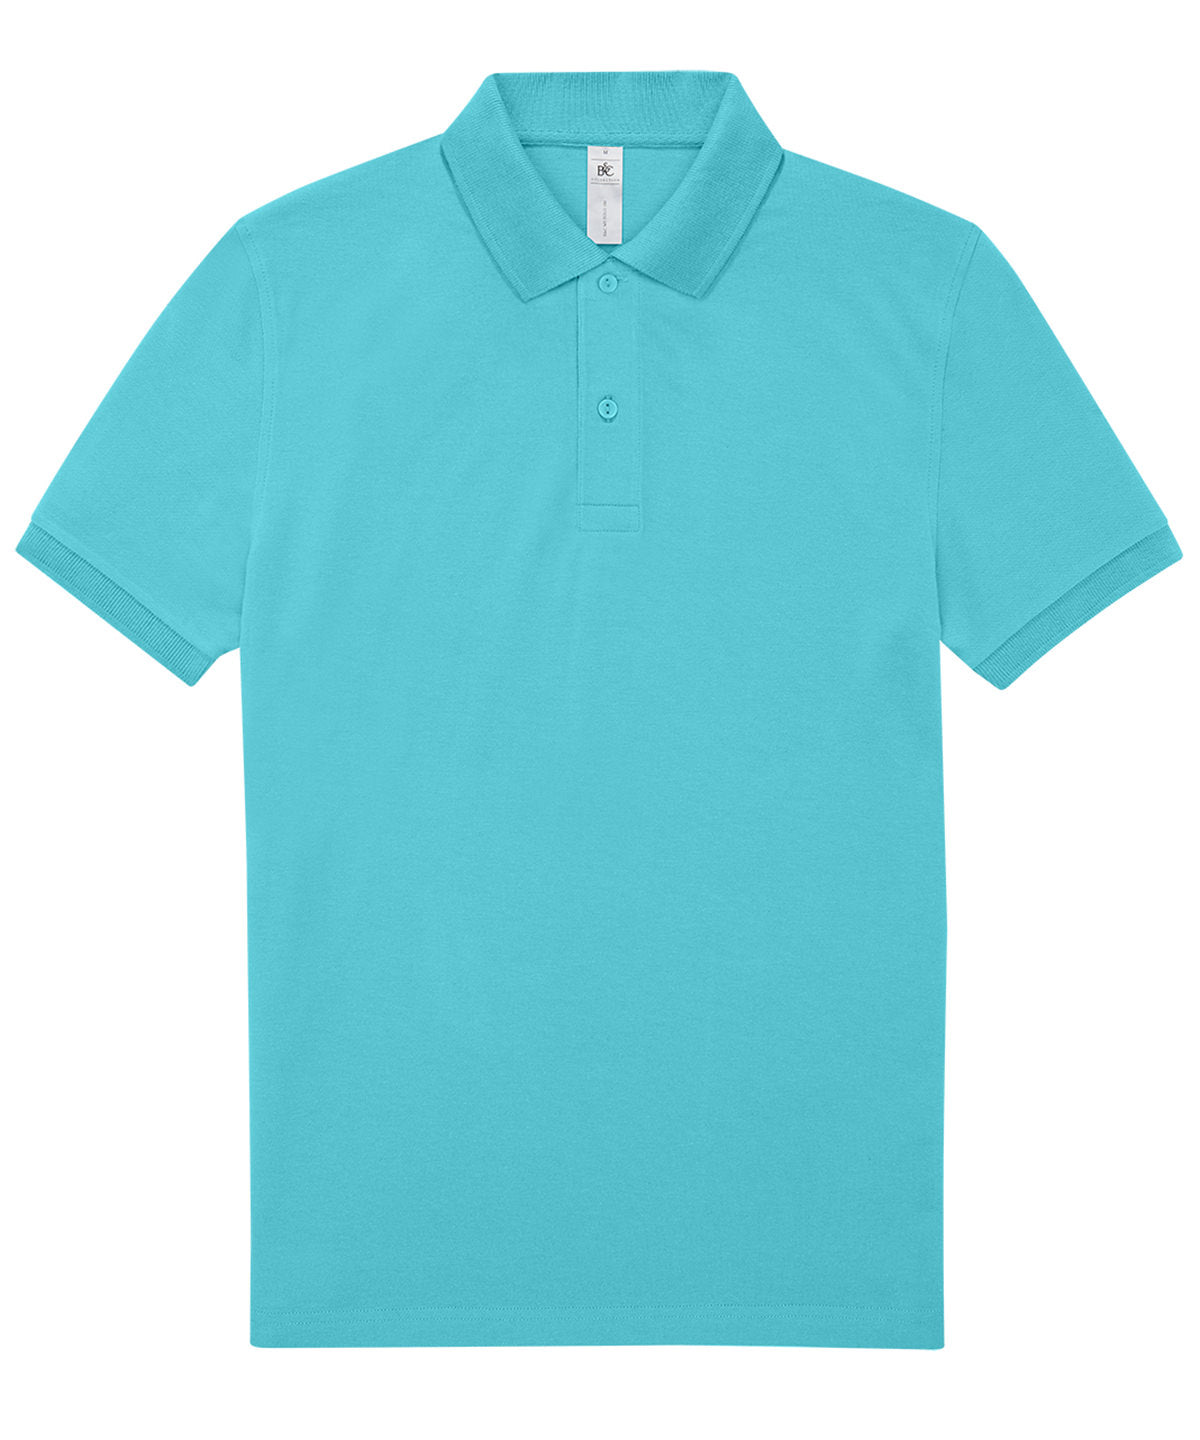 Personalised Polo Shirts - Mid Orange B&C Collection B&C My Polo 180